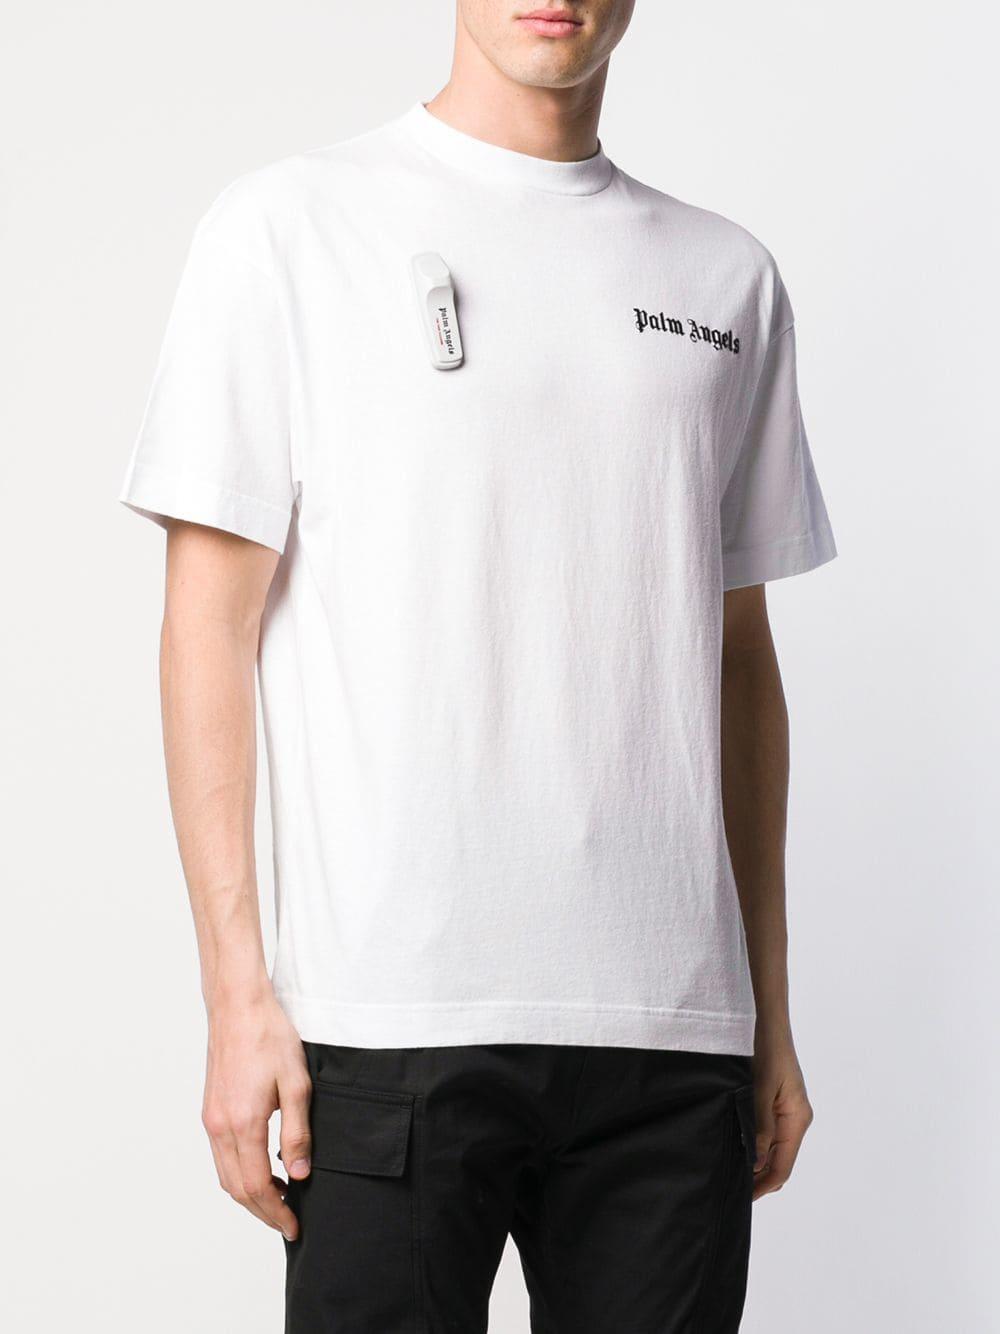 palm angels security tag t shirt